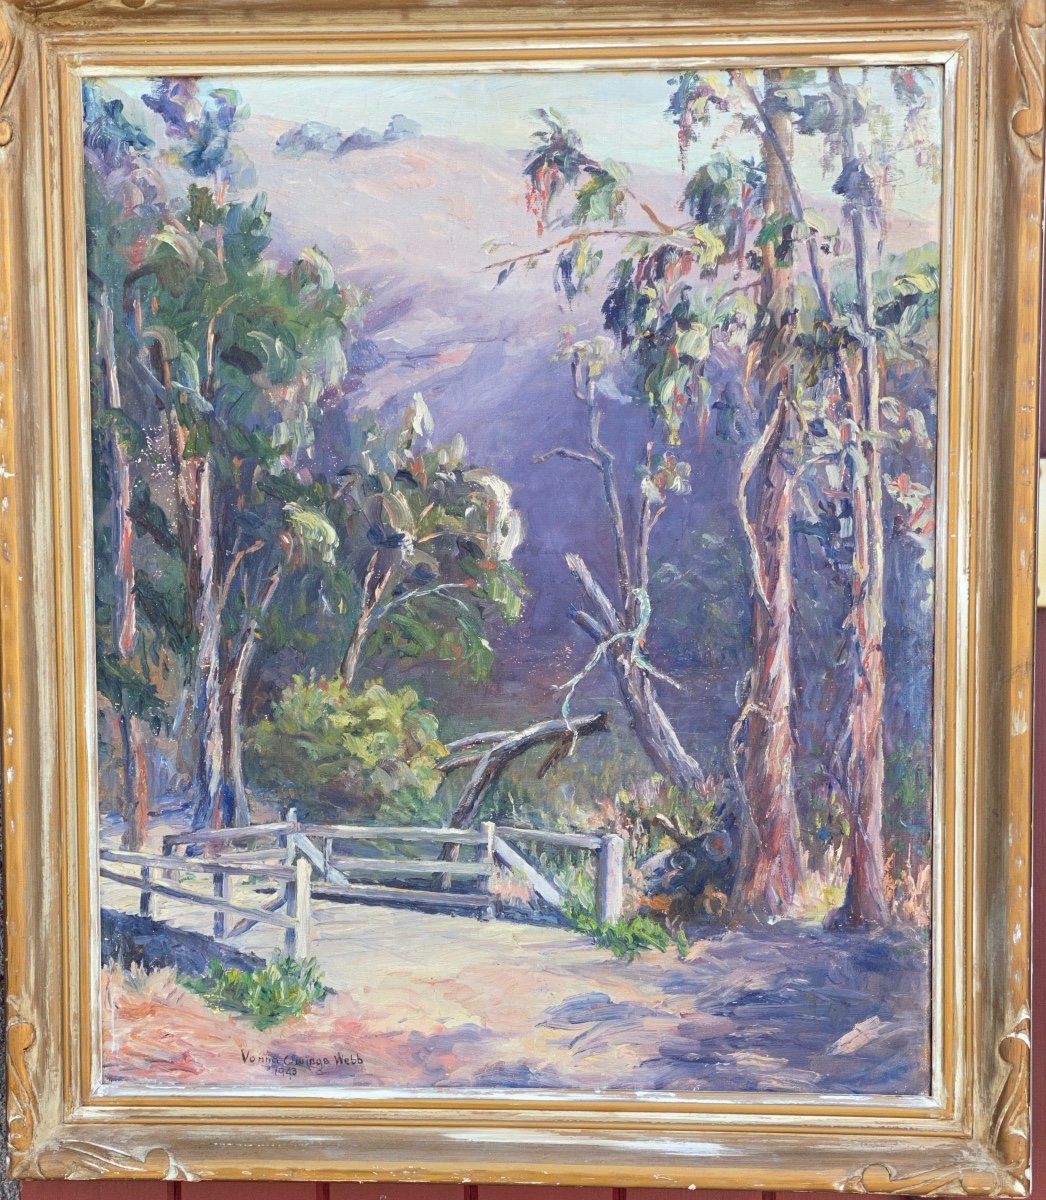 Vonna Owings Webb 1876-1964 American Impressionist Painter From California-photo-2